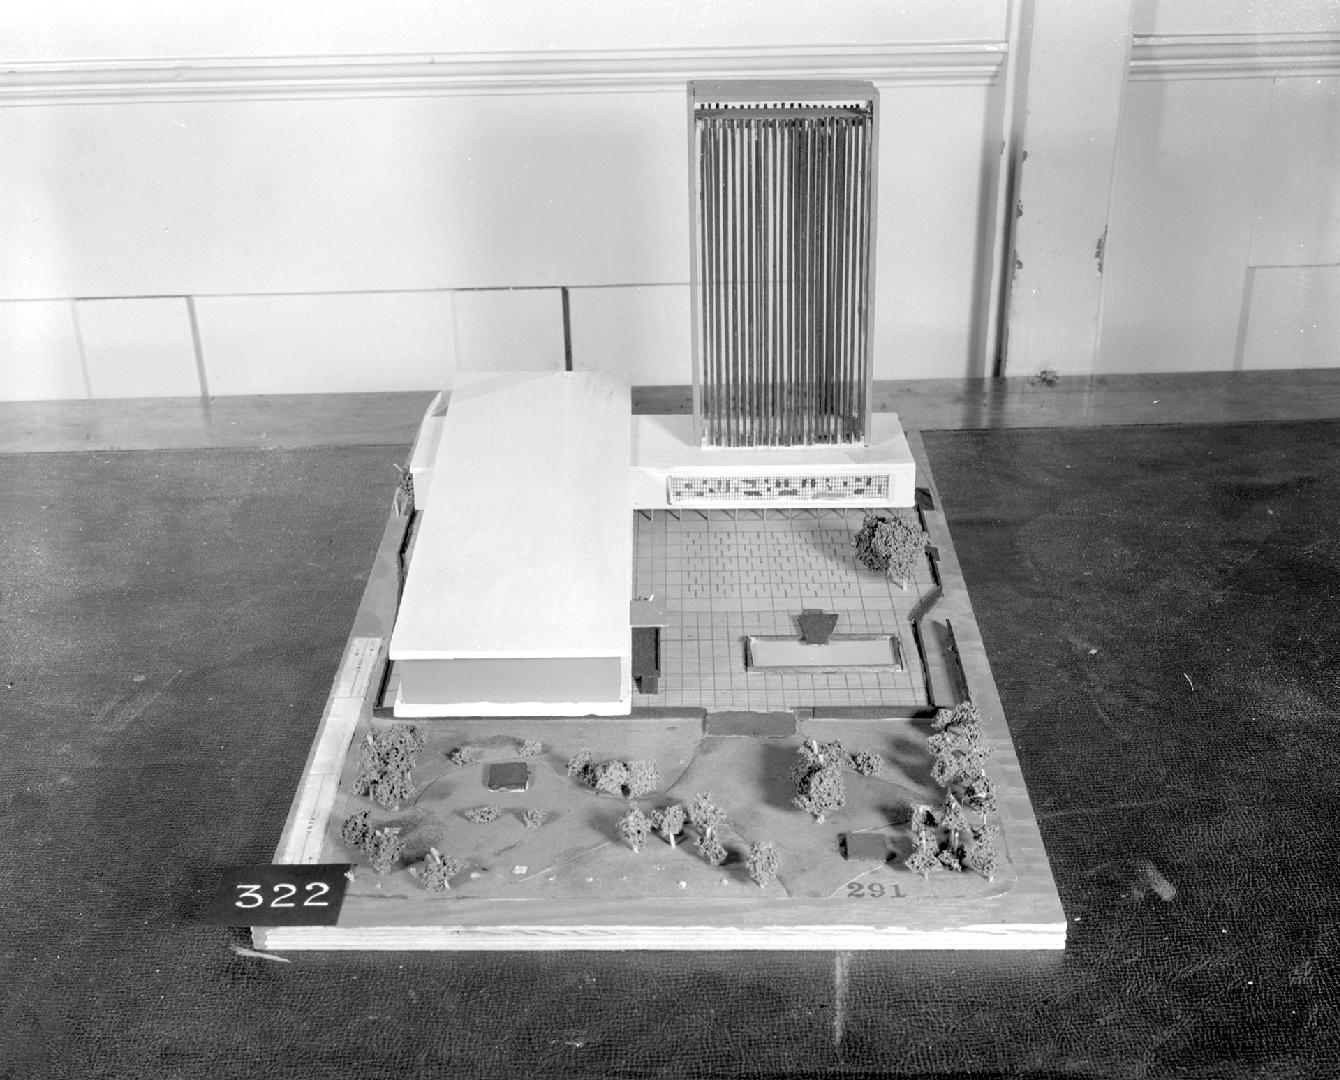 P. N. Morgan entry, City Hall and Square Competition, Toronto, 1958, architectural model